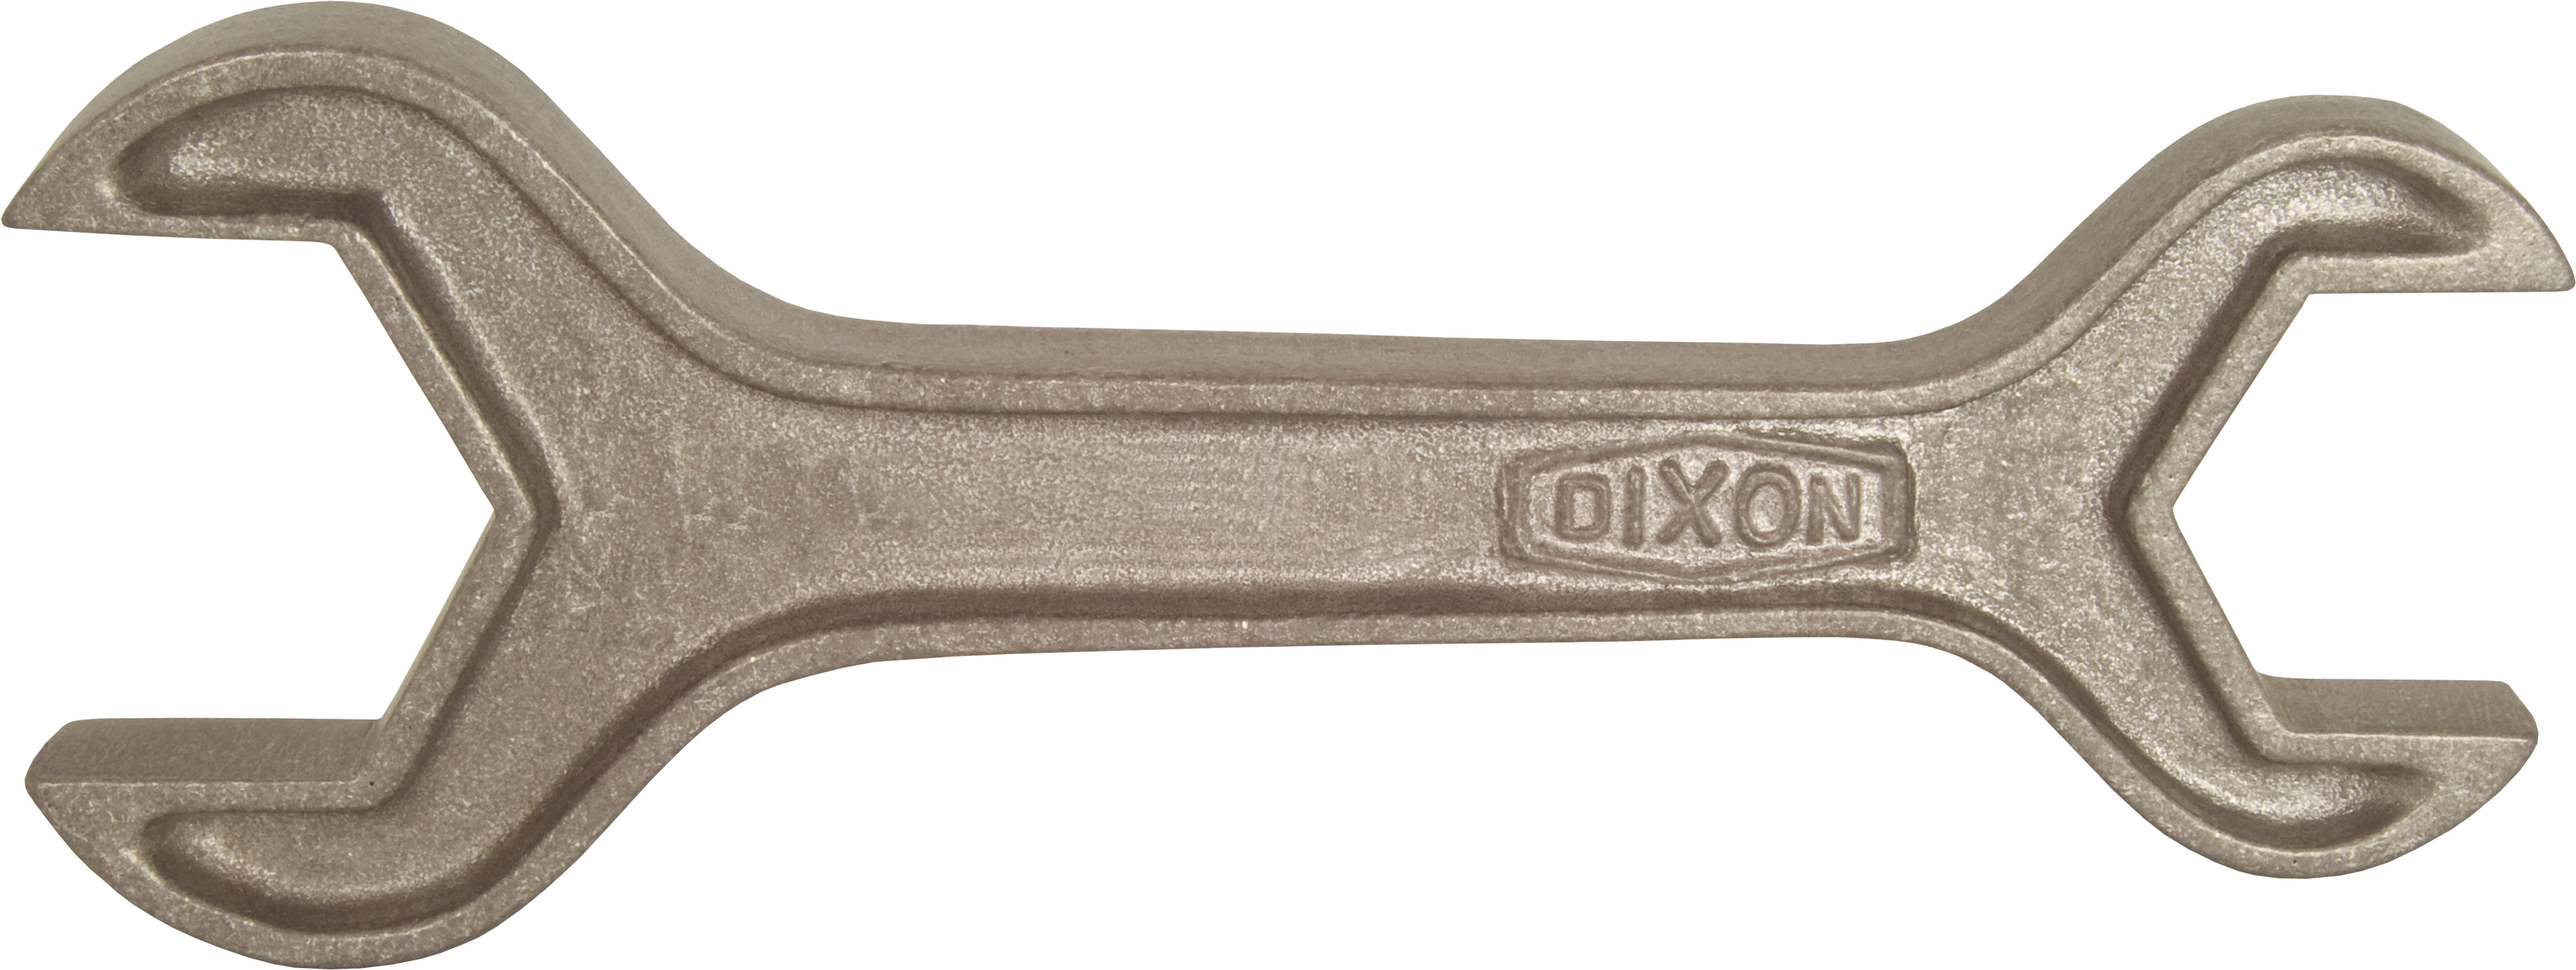 TWO SIDED HEX WRENCH